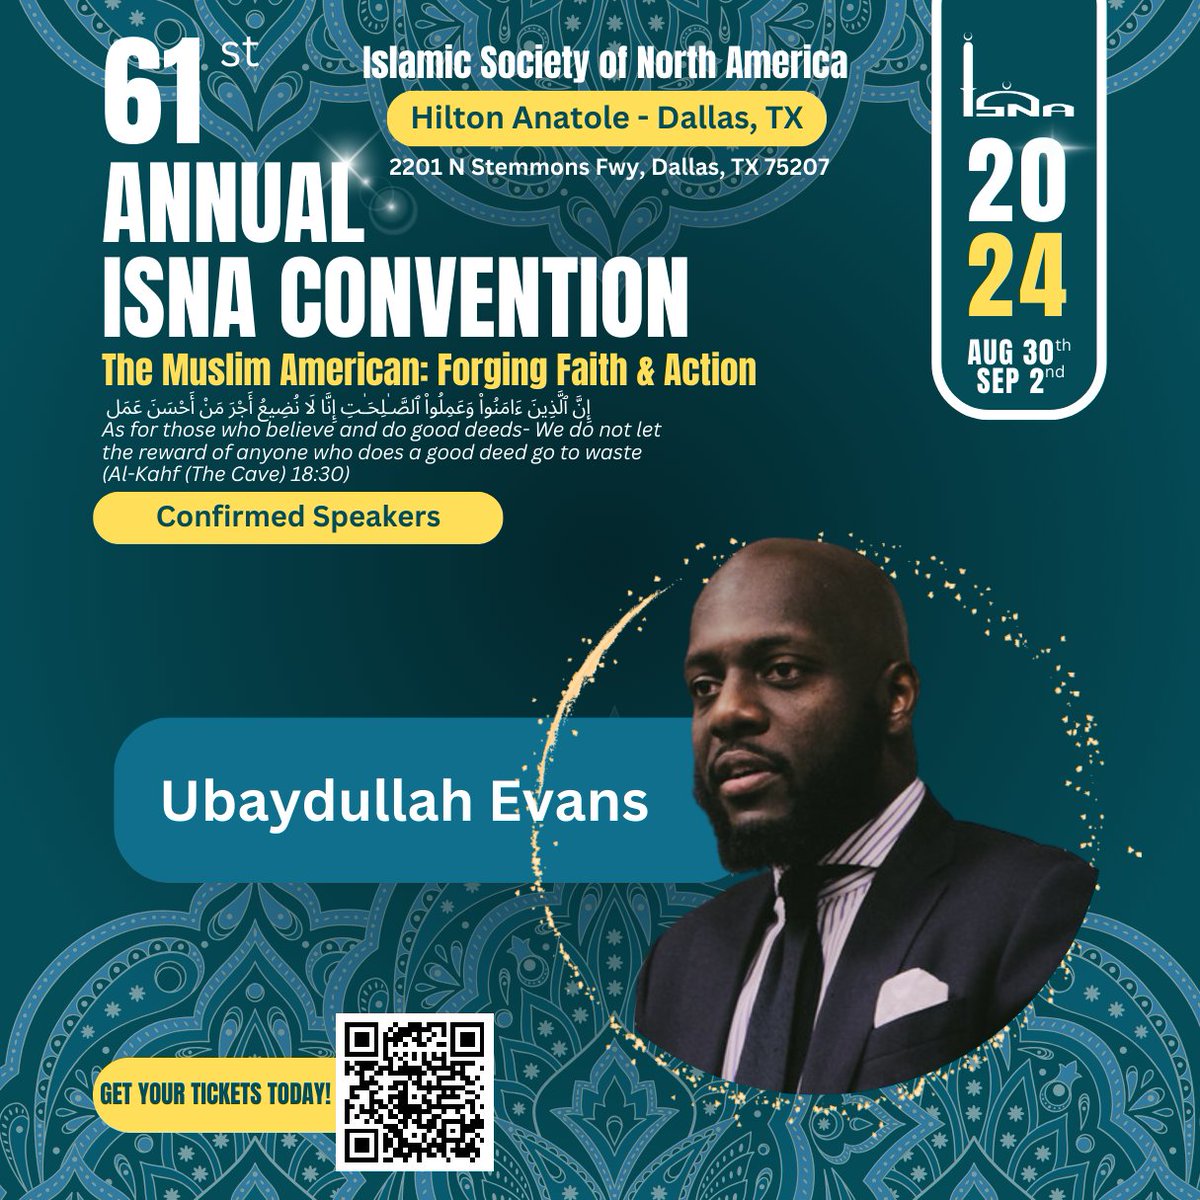 Ubaydullah Evans is a confirmed speaker for ISNA's 61st Annual Convention in Dallas, TX this year!

Get your tickets at isna.net/convention/

#ISNA61 #ISNAconvention #dallas